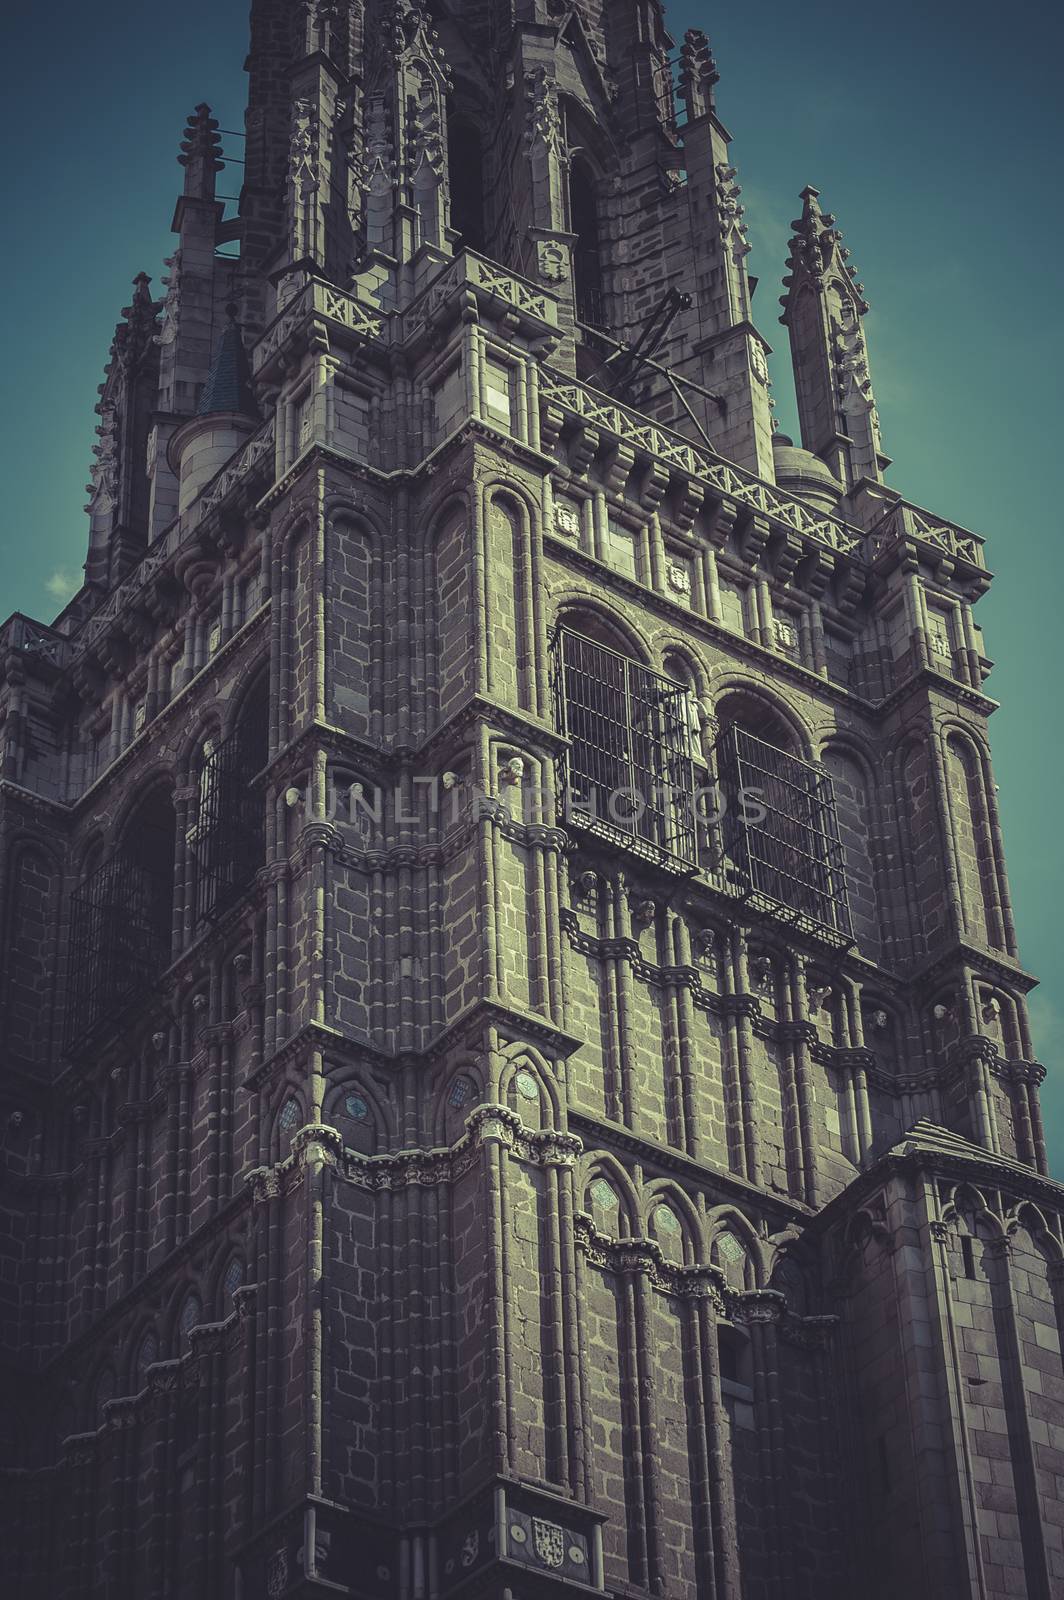 Gothic, Toledo cathedral, majestic monument in spain.